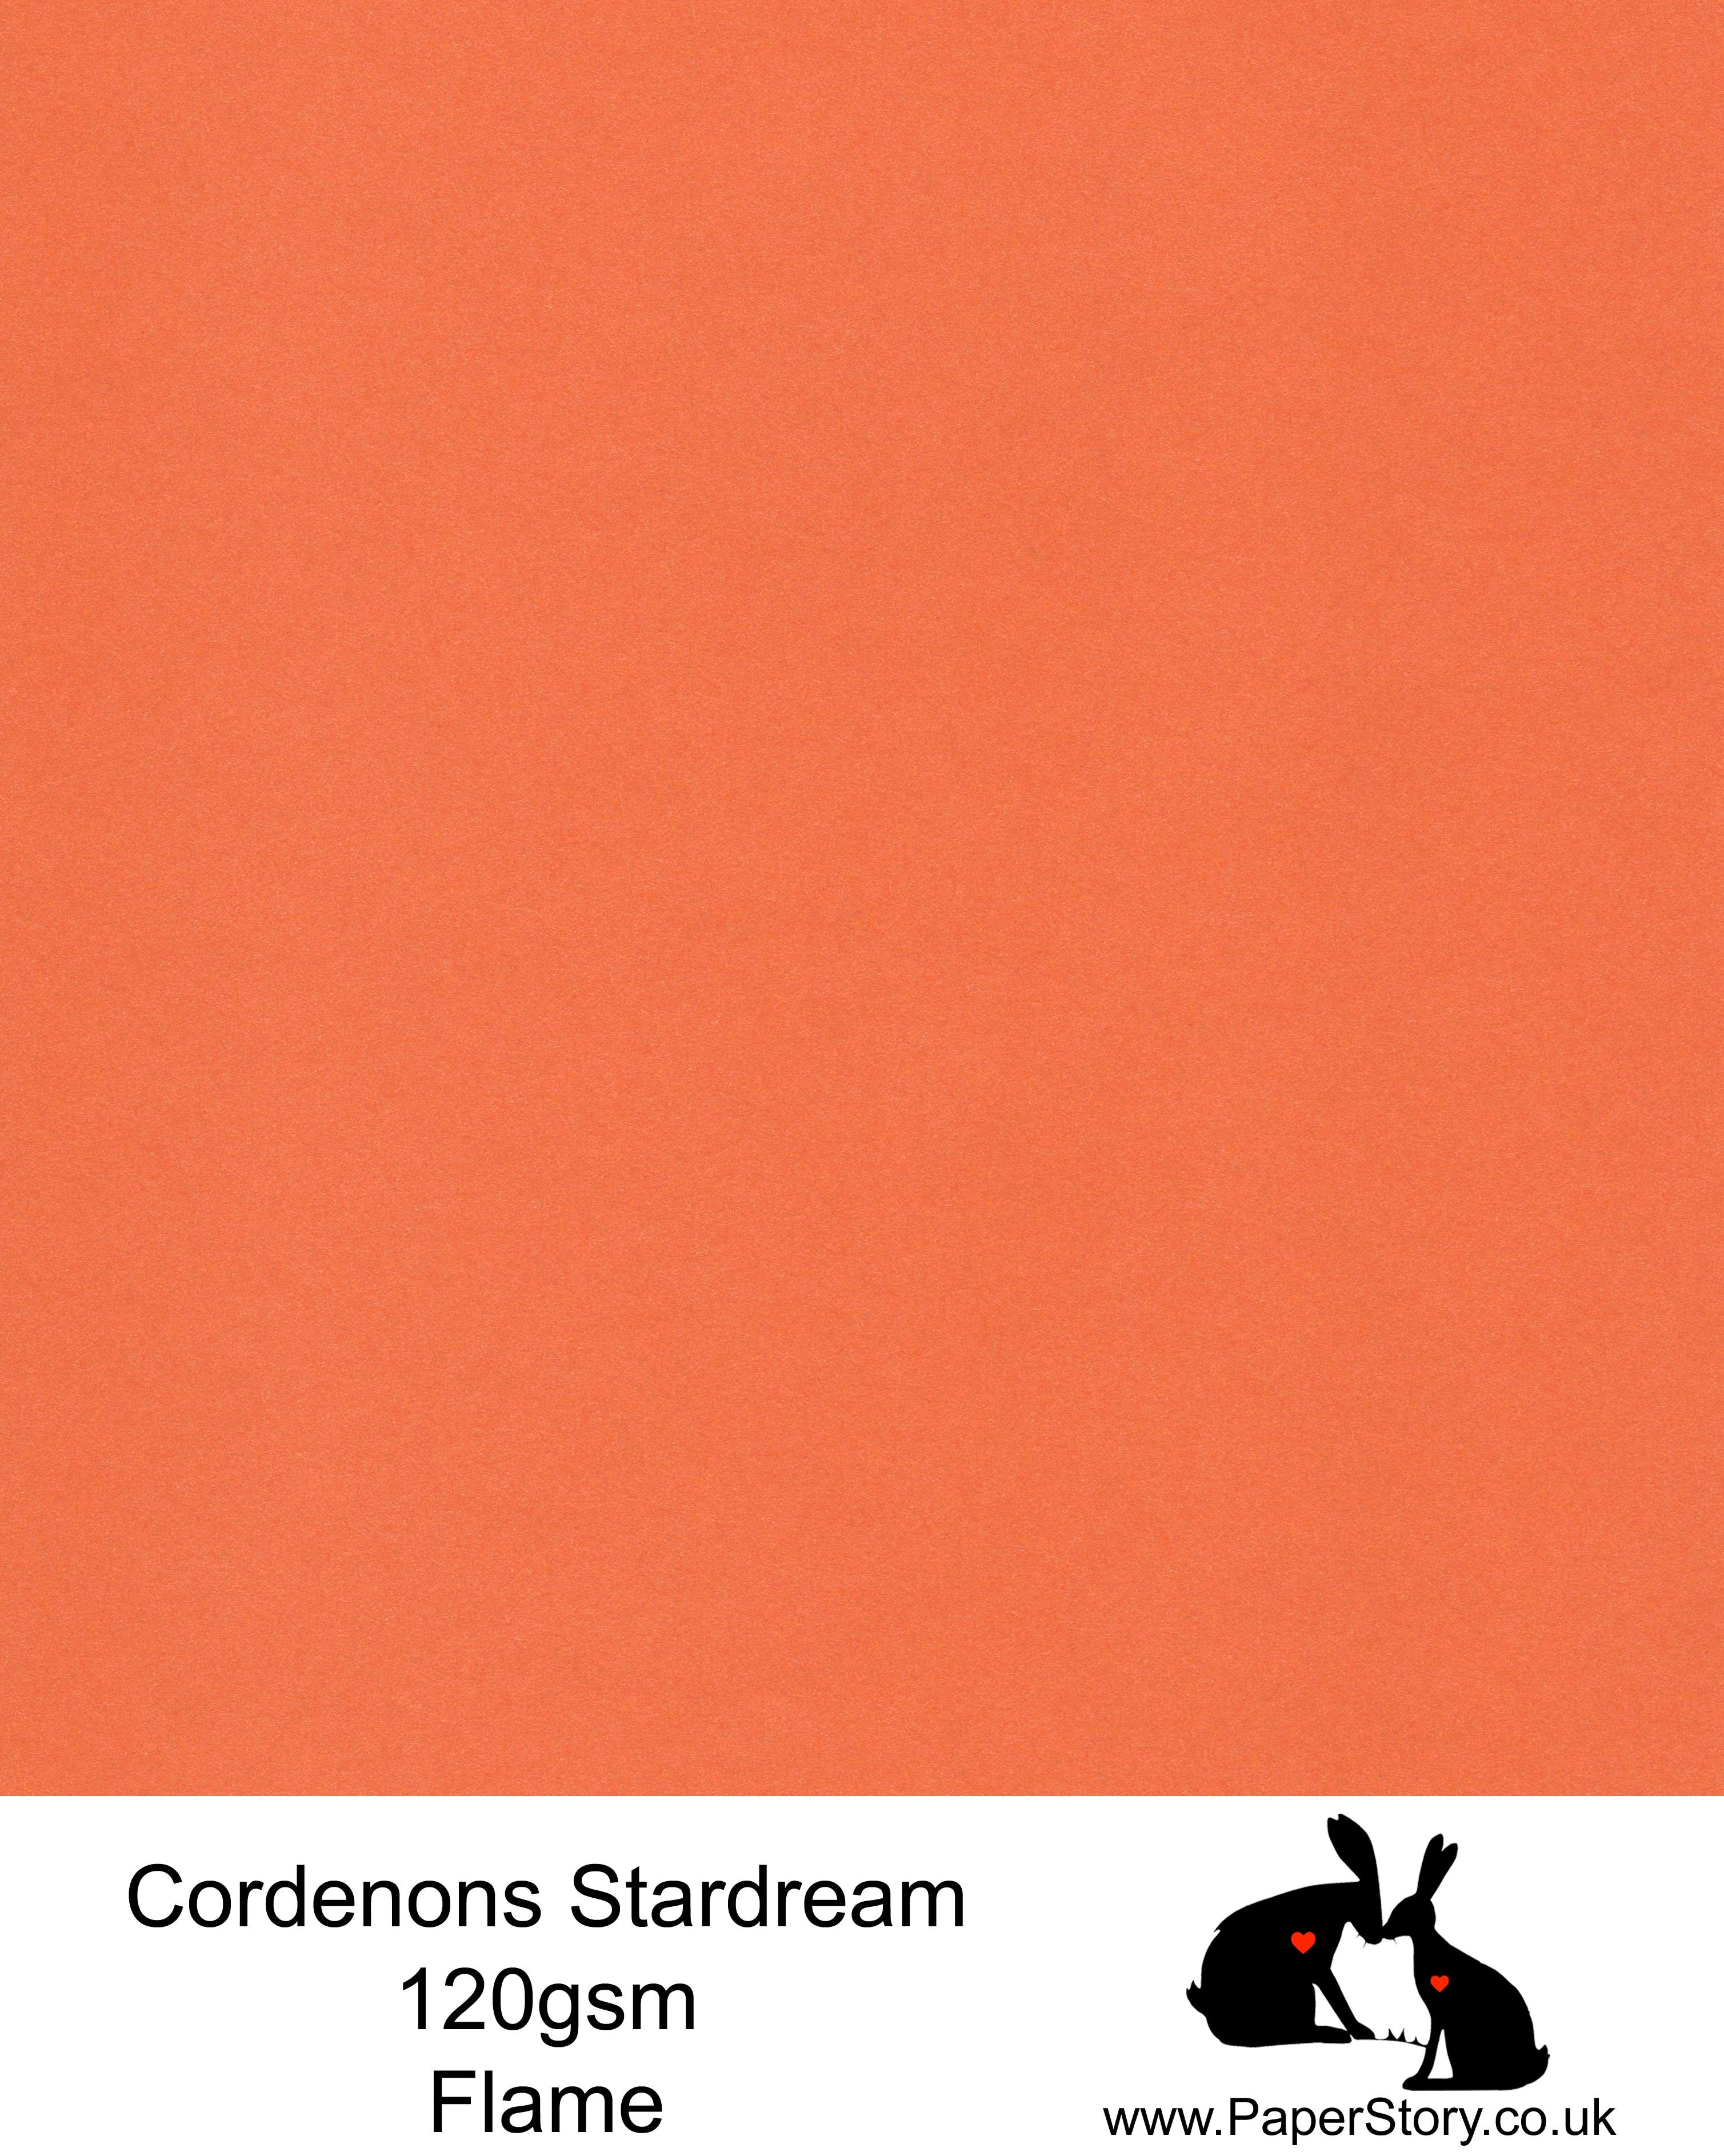 A4 Stardream 120gsm paper for Papercutting, craft, flower making  and wedding stationery. Flame orange, is a perfect colour for paper flowers as well as part of our rainbow packs and halloween.  Stardream is a luxury Italian paper from Italy, it is a double sided quality Pearlescent paper with a matching colour core. FSC Certified, acid free, archival and PH Neutral